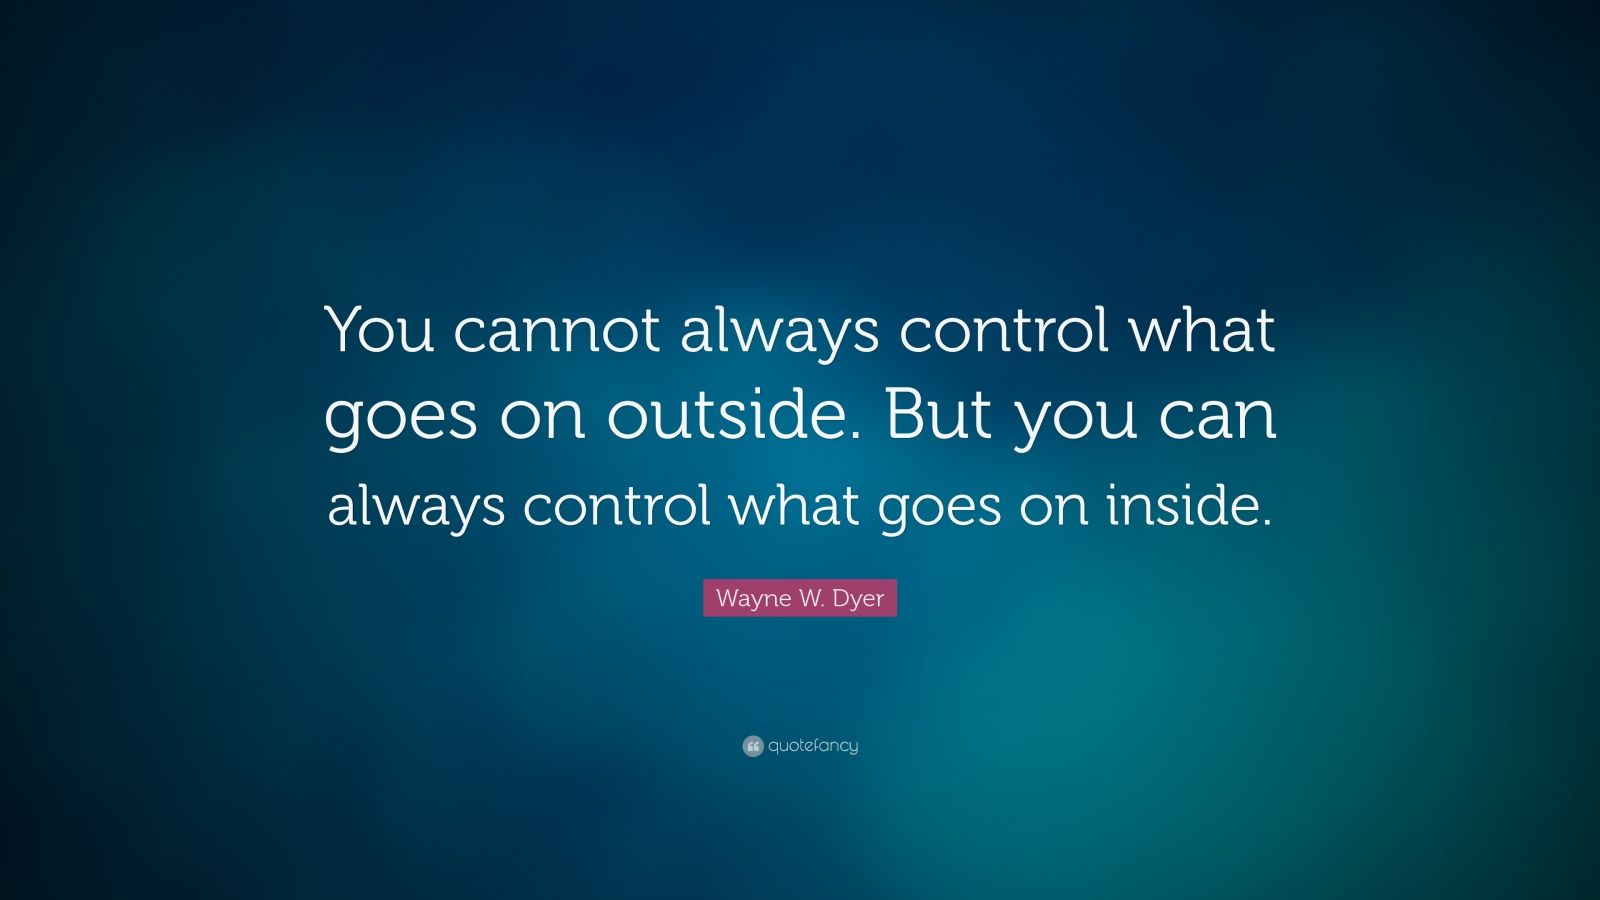 Wayne W. Dyer Quote: “You cannot always control what goes on outside ...